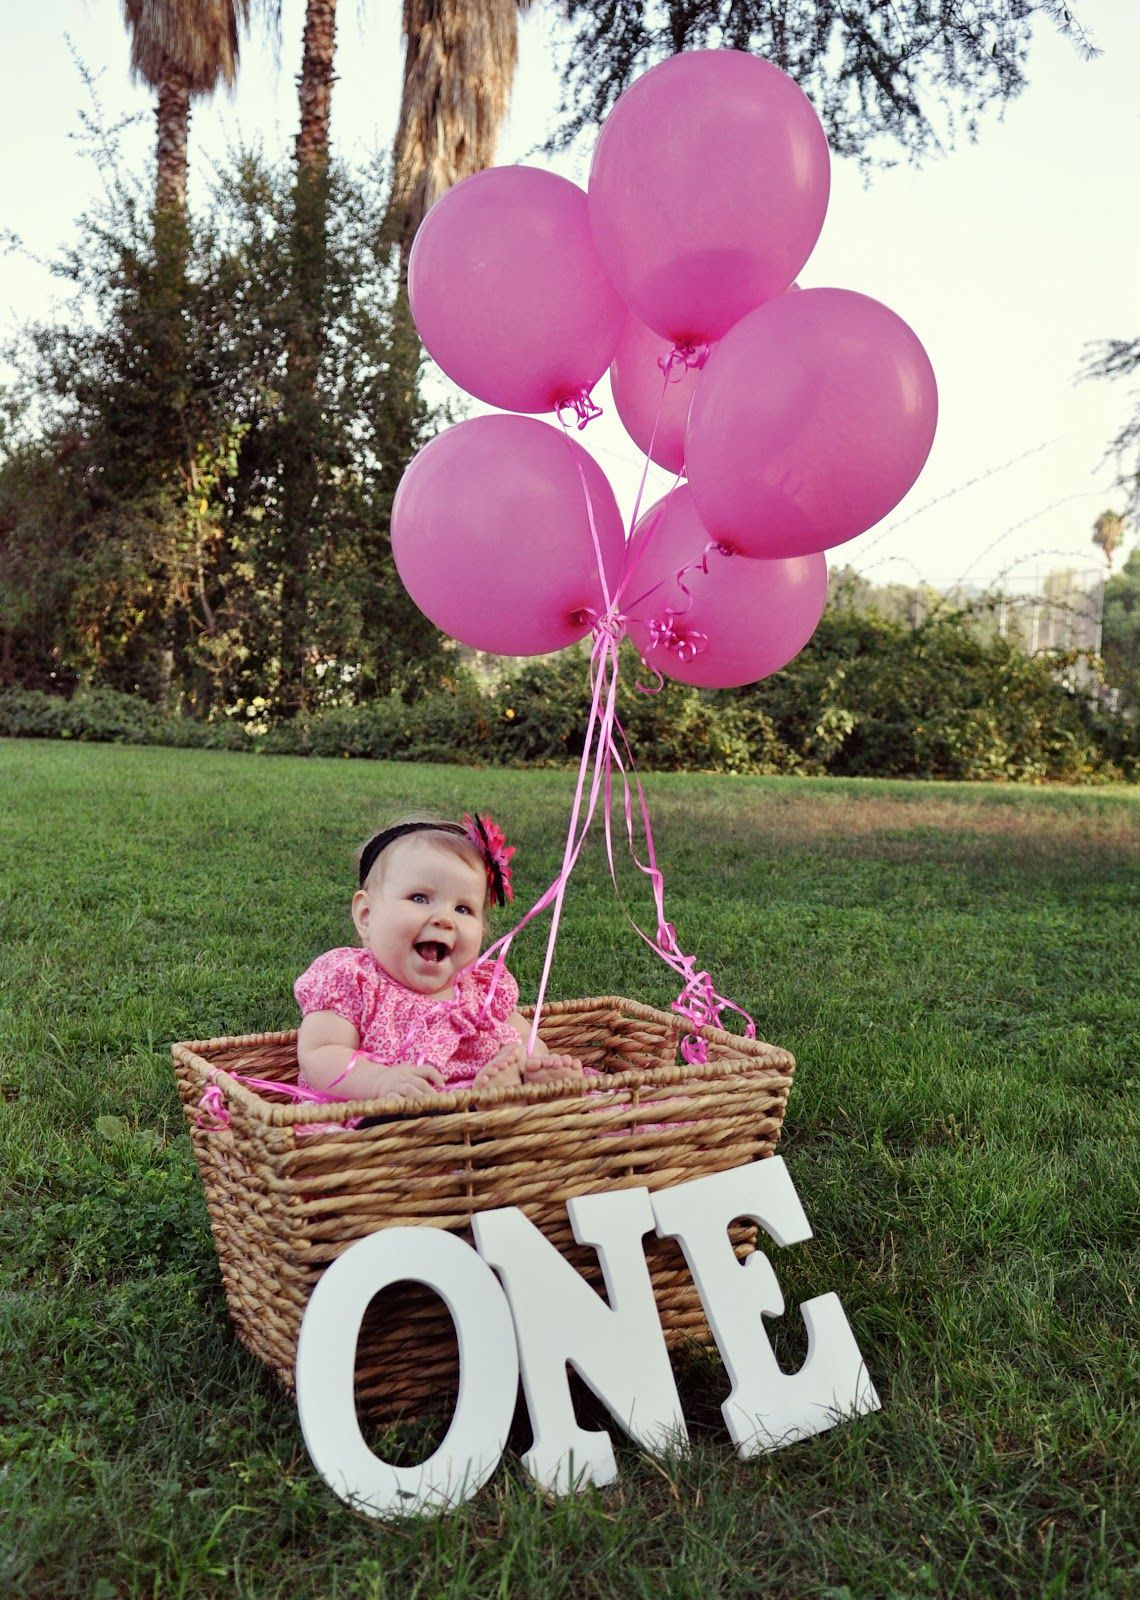 Party Theme For 1 Year Old Baby Girl
 Birthday party photo shoot ideas for your little one